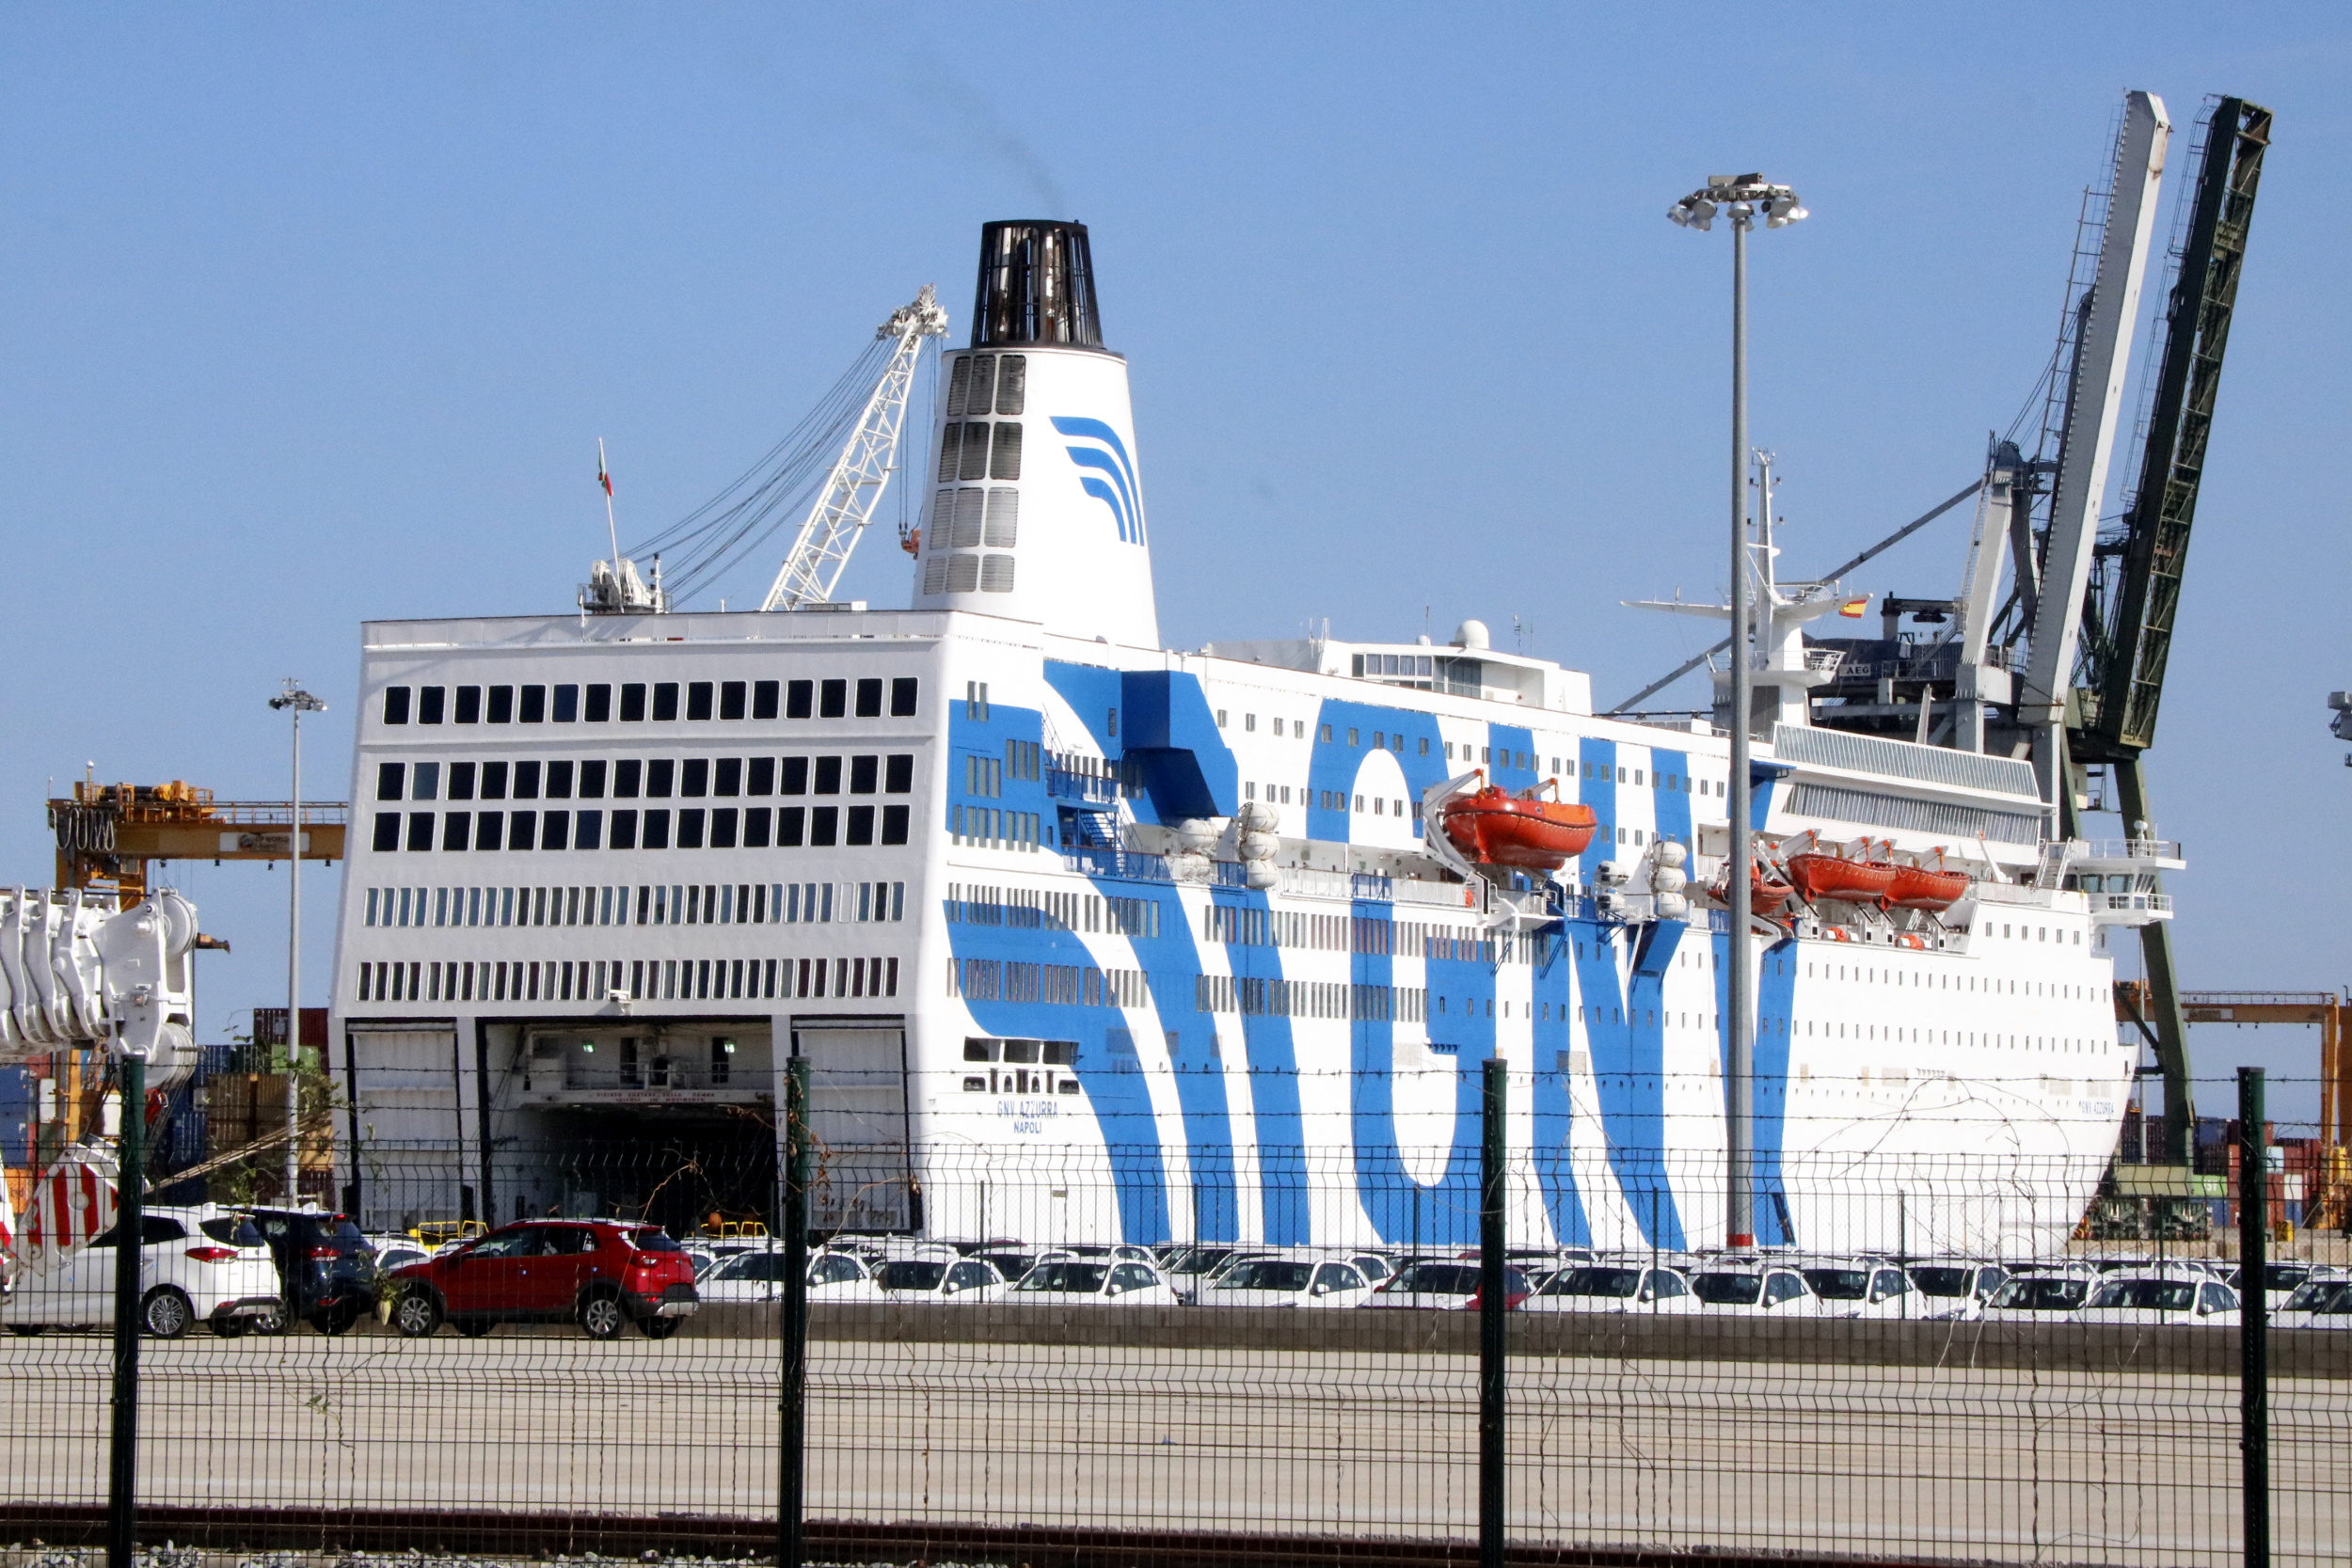 The GNV Azzurro in the Port of Tarragona by order of Spain (by Roger Segura)